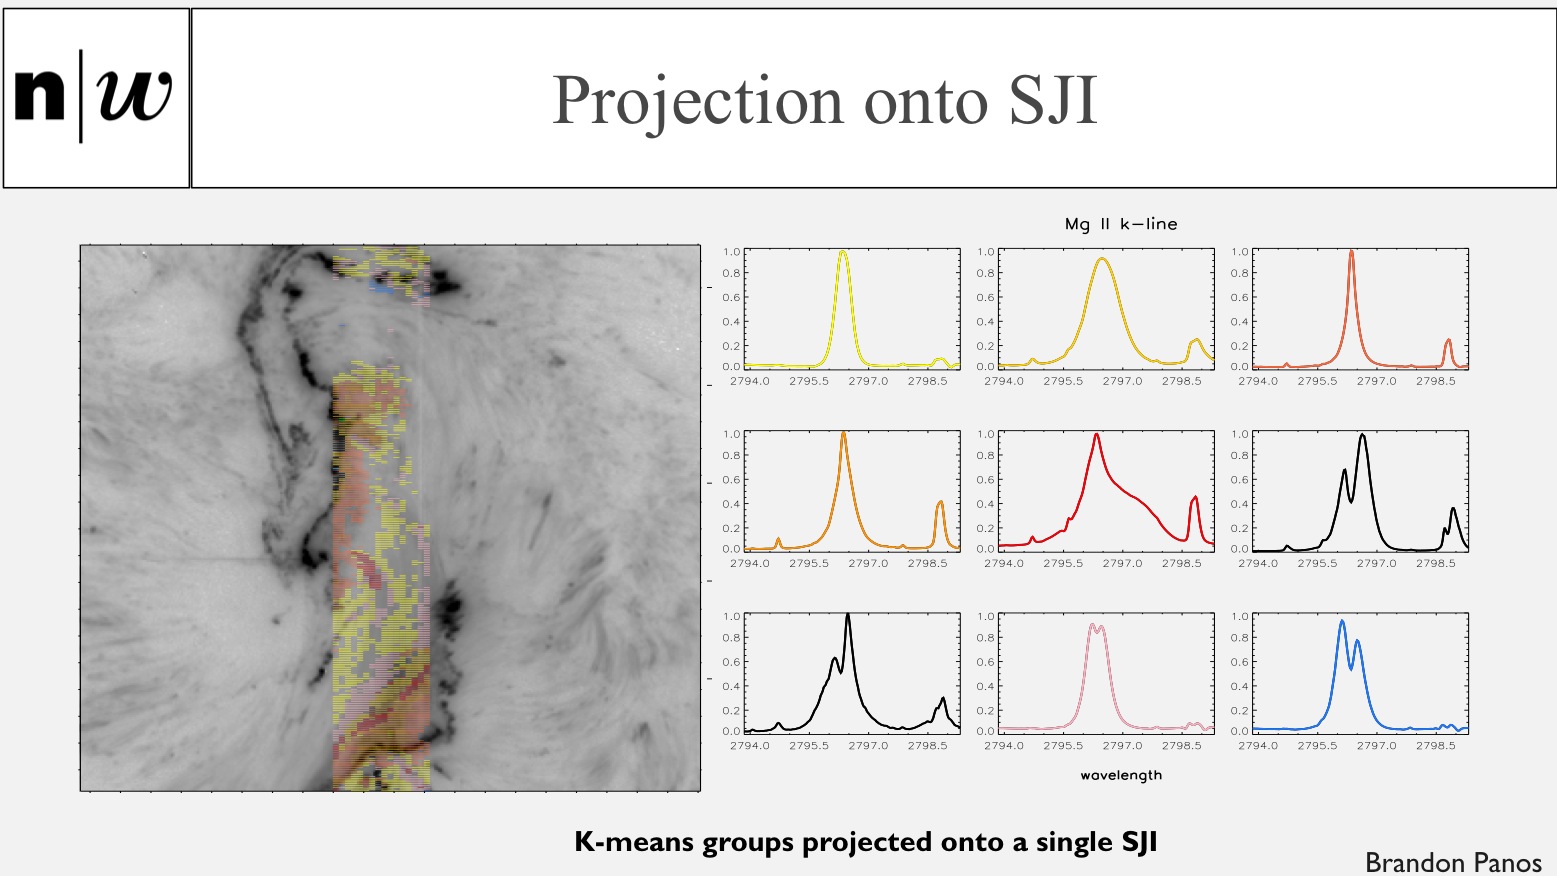 K-means groups projected onto a single SJI